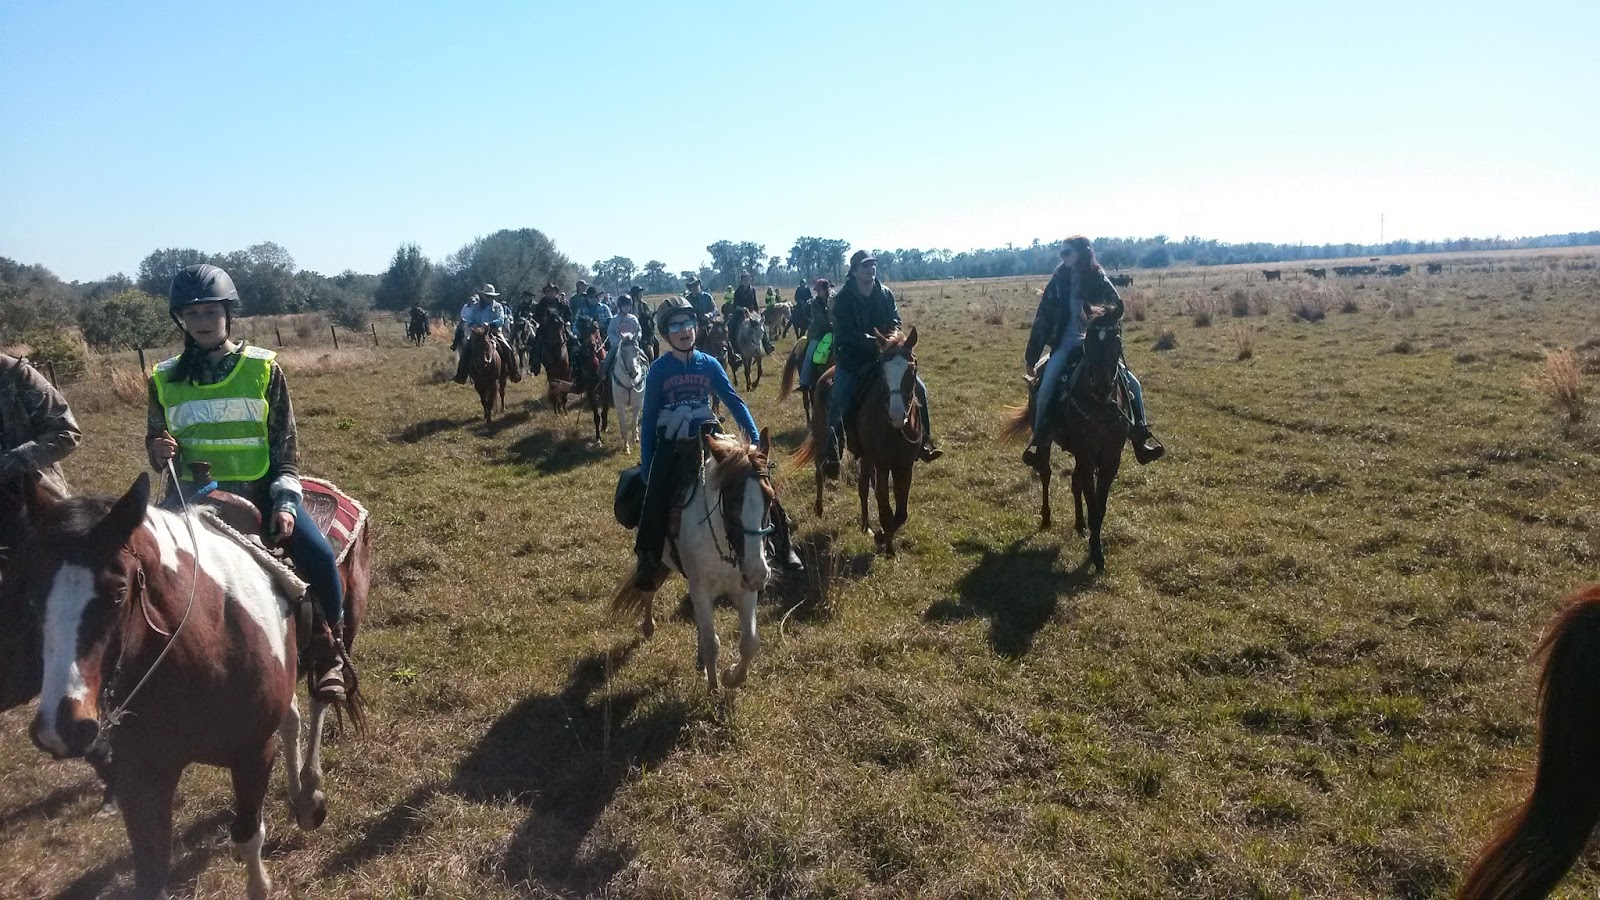 Eastword Photos from Cracker Trail Ride bring us about as close to the